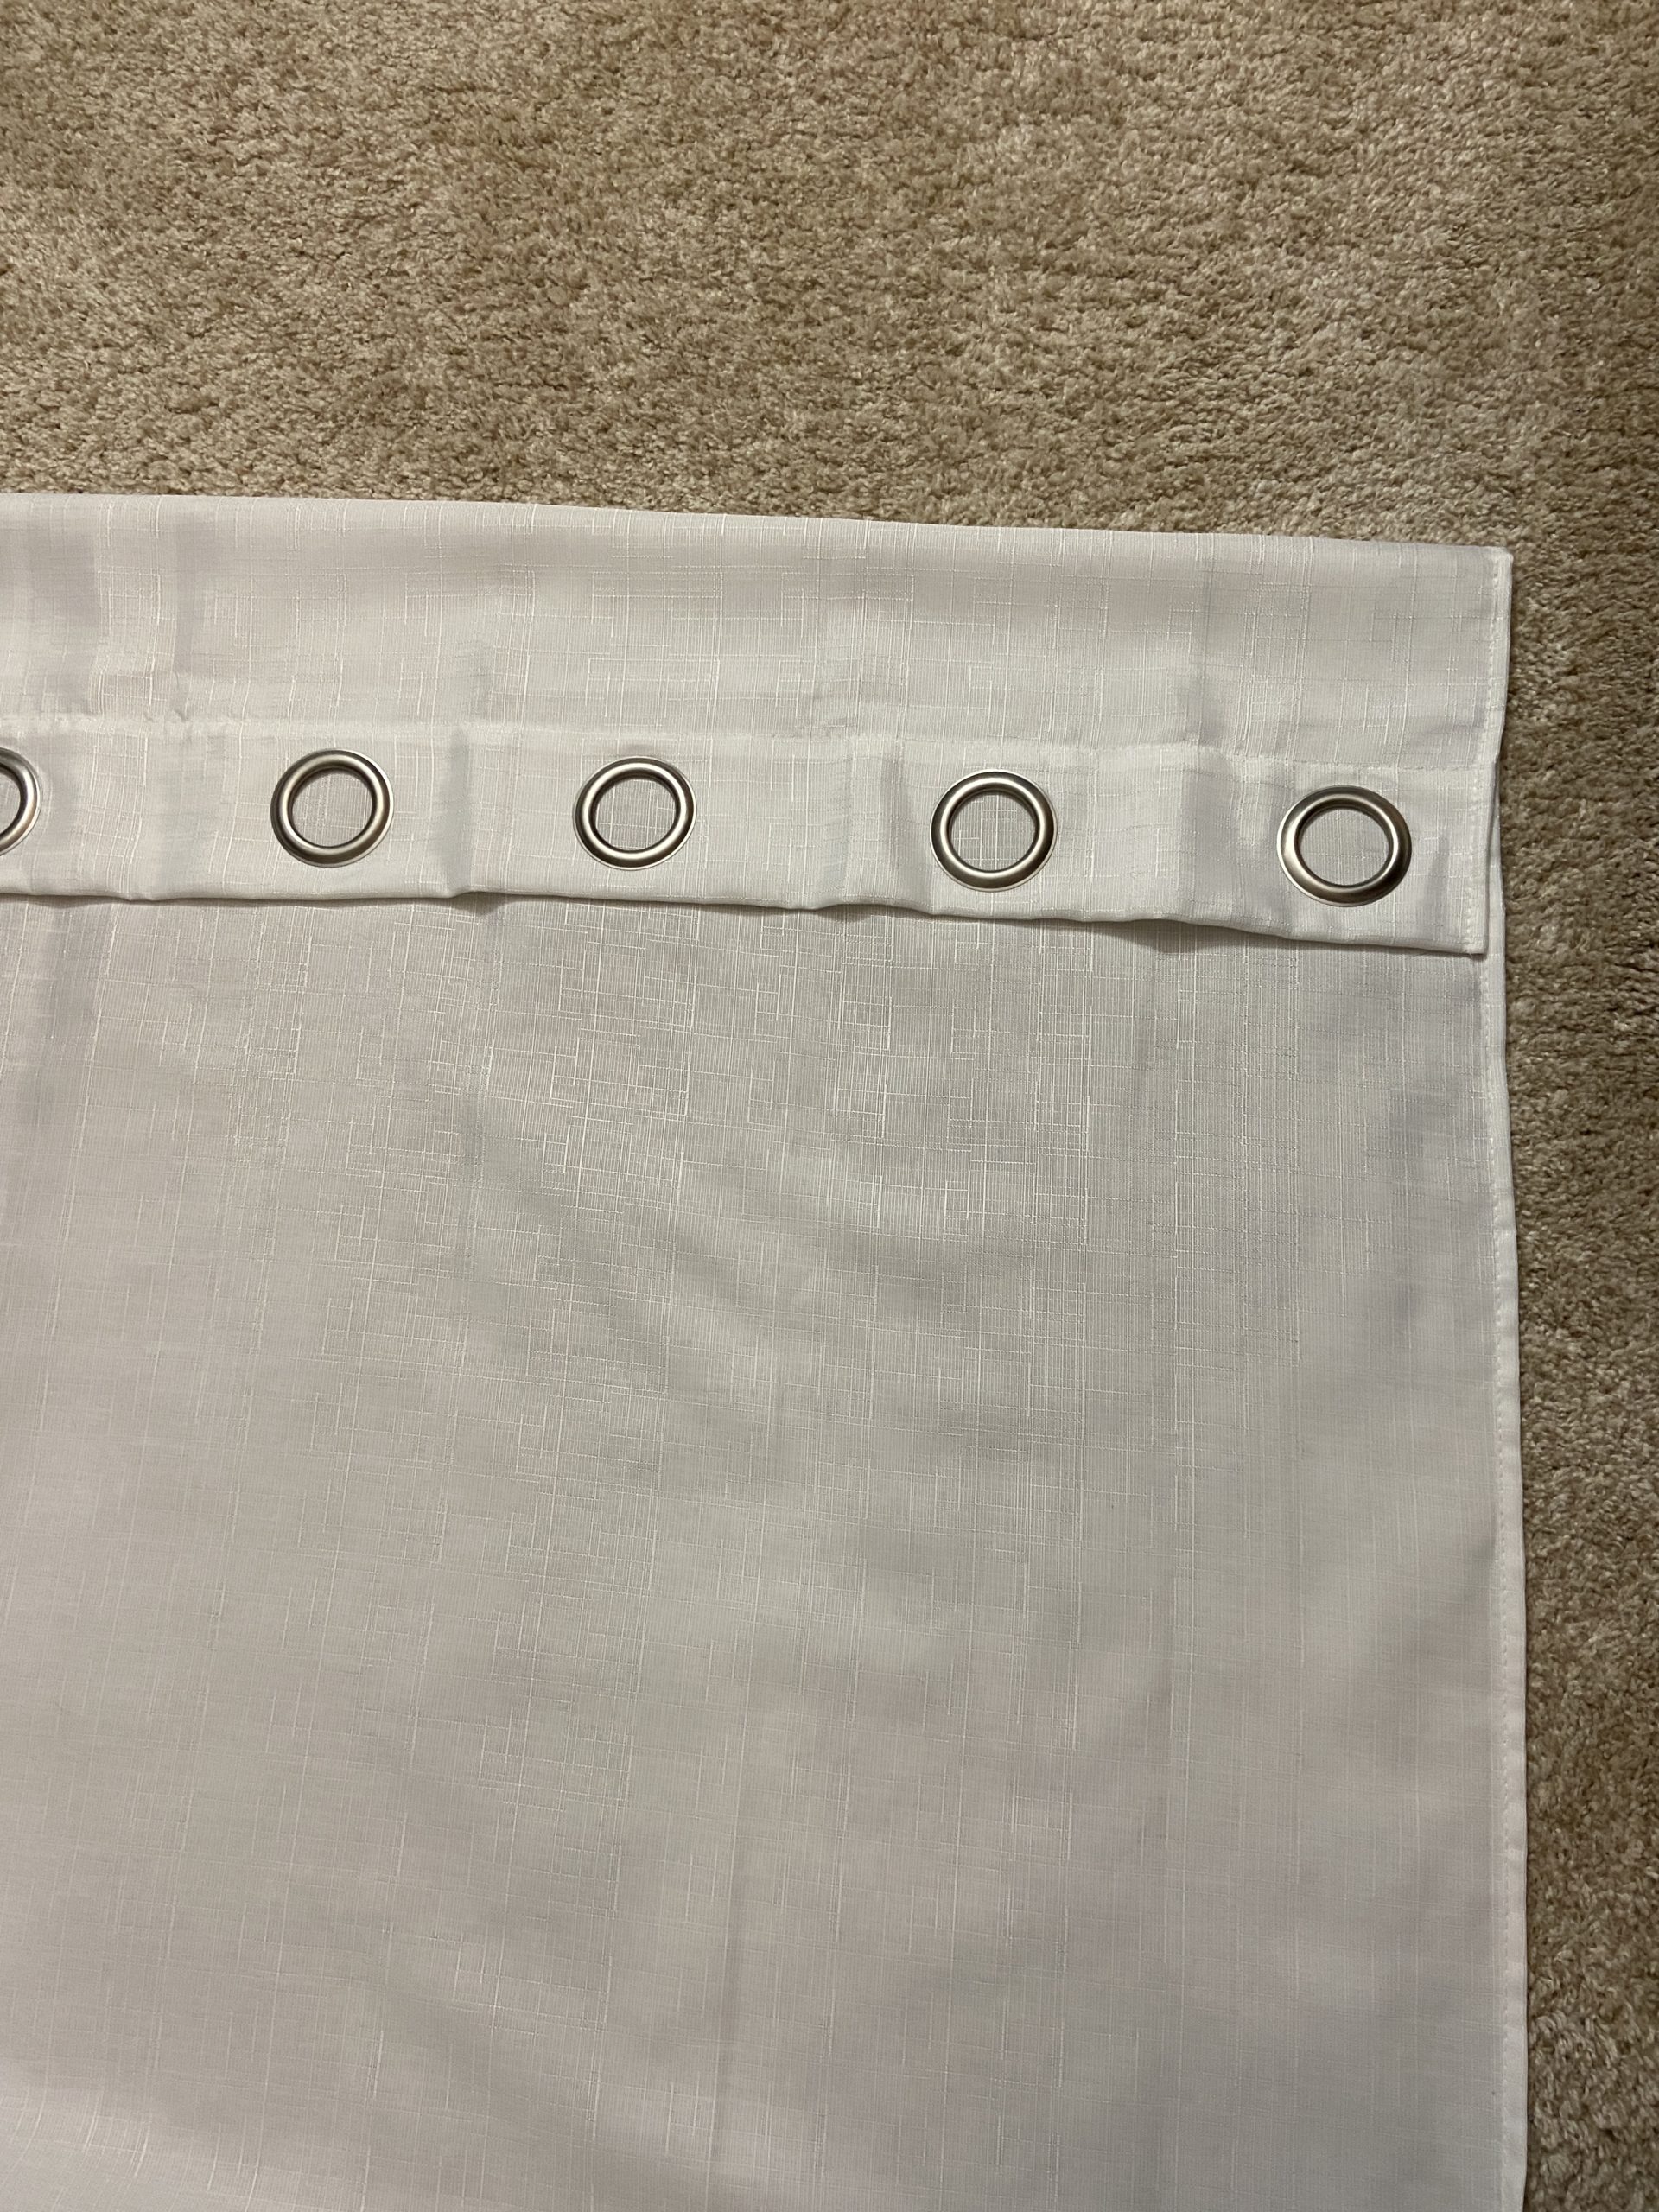 Curtain Hack 3: How To Hem Curtains Without Sewing 